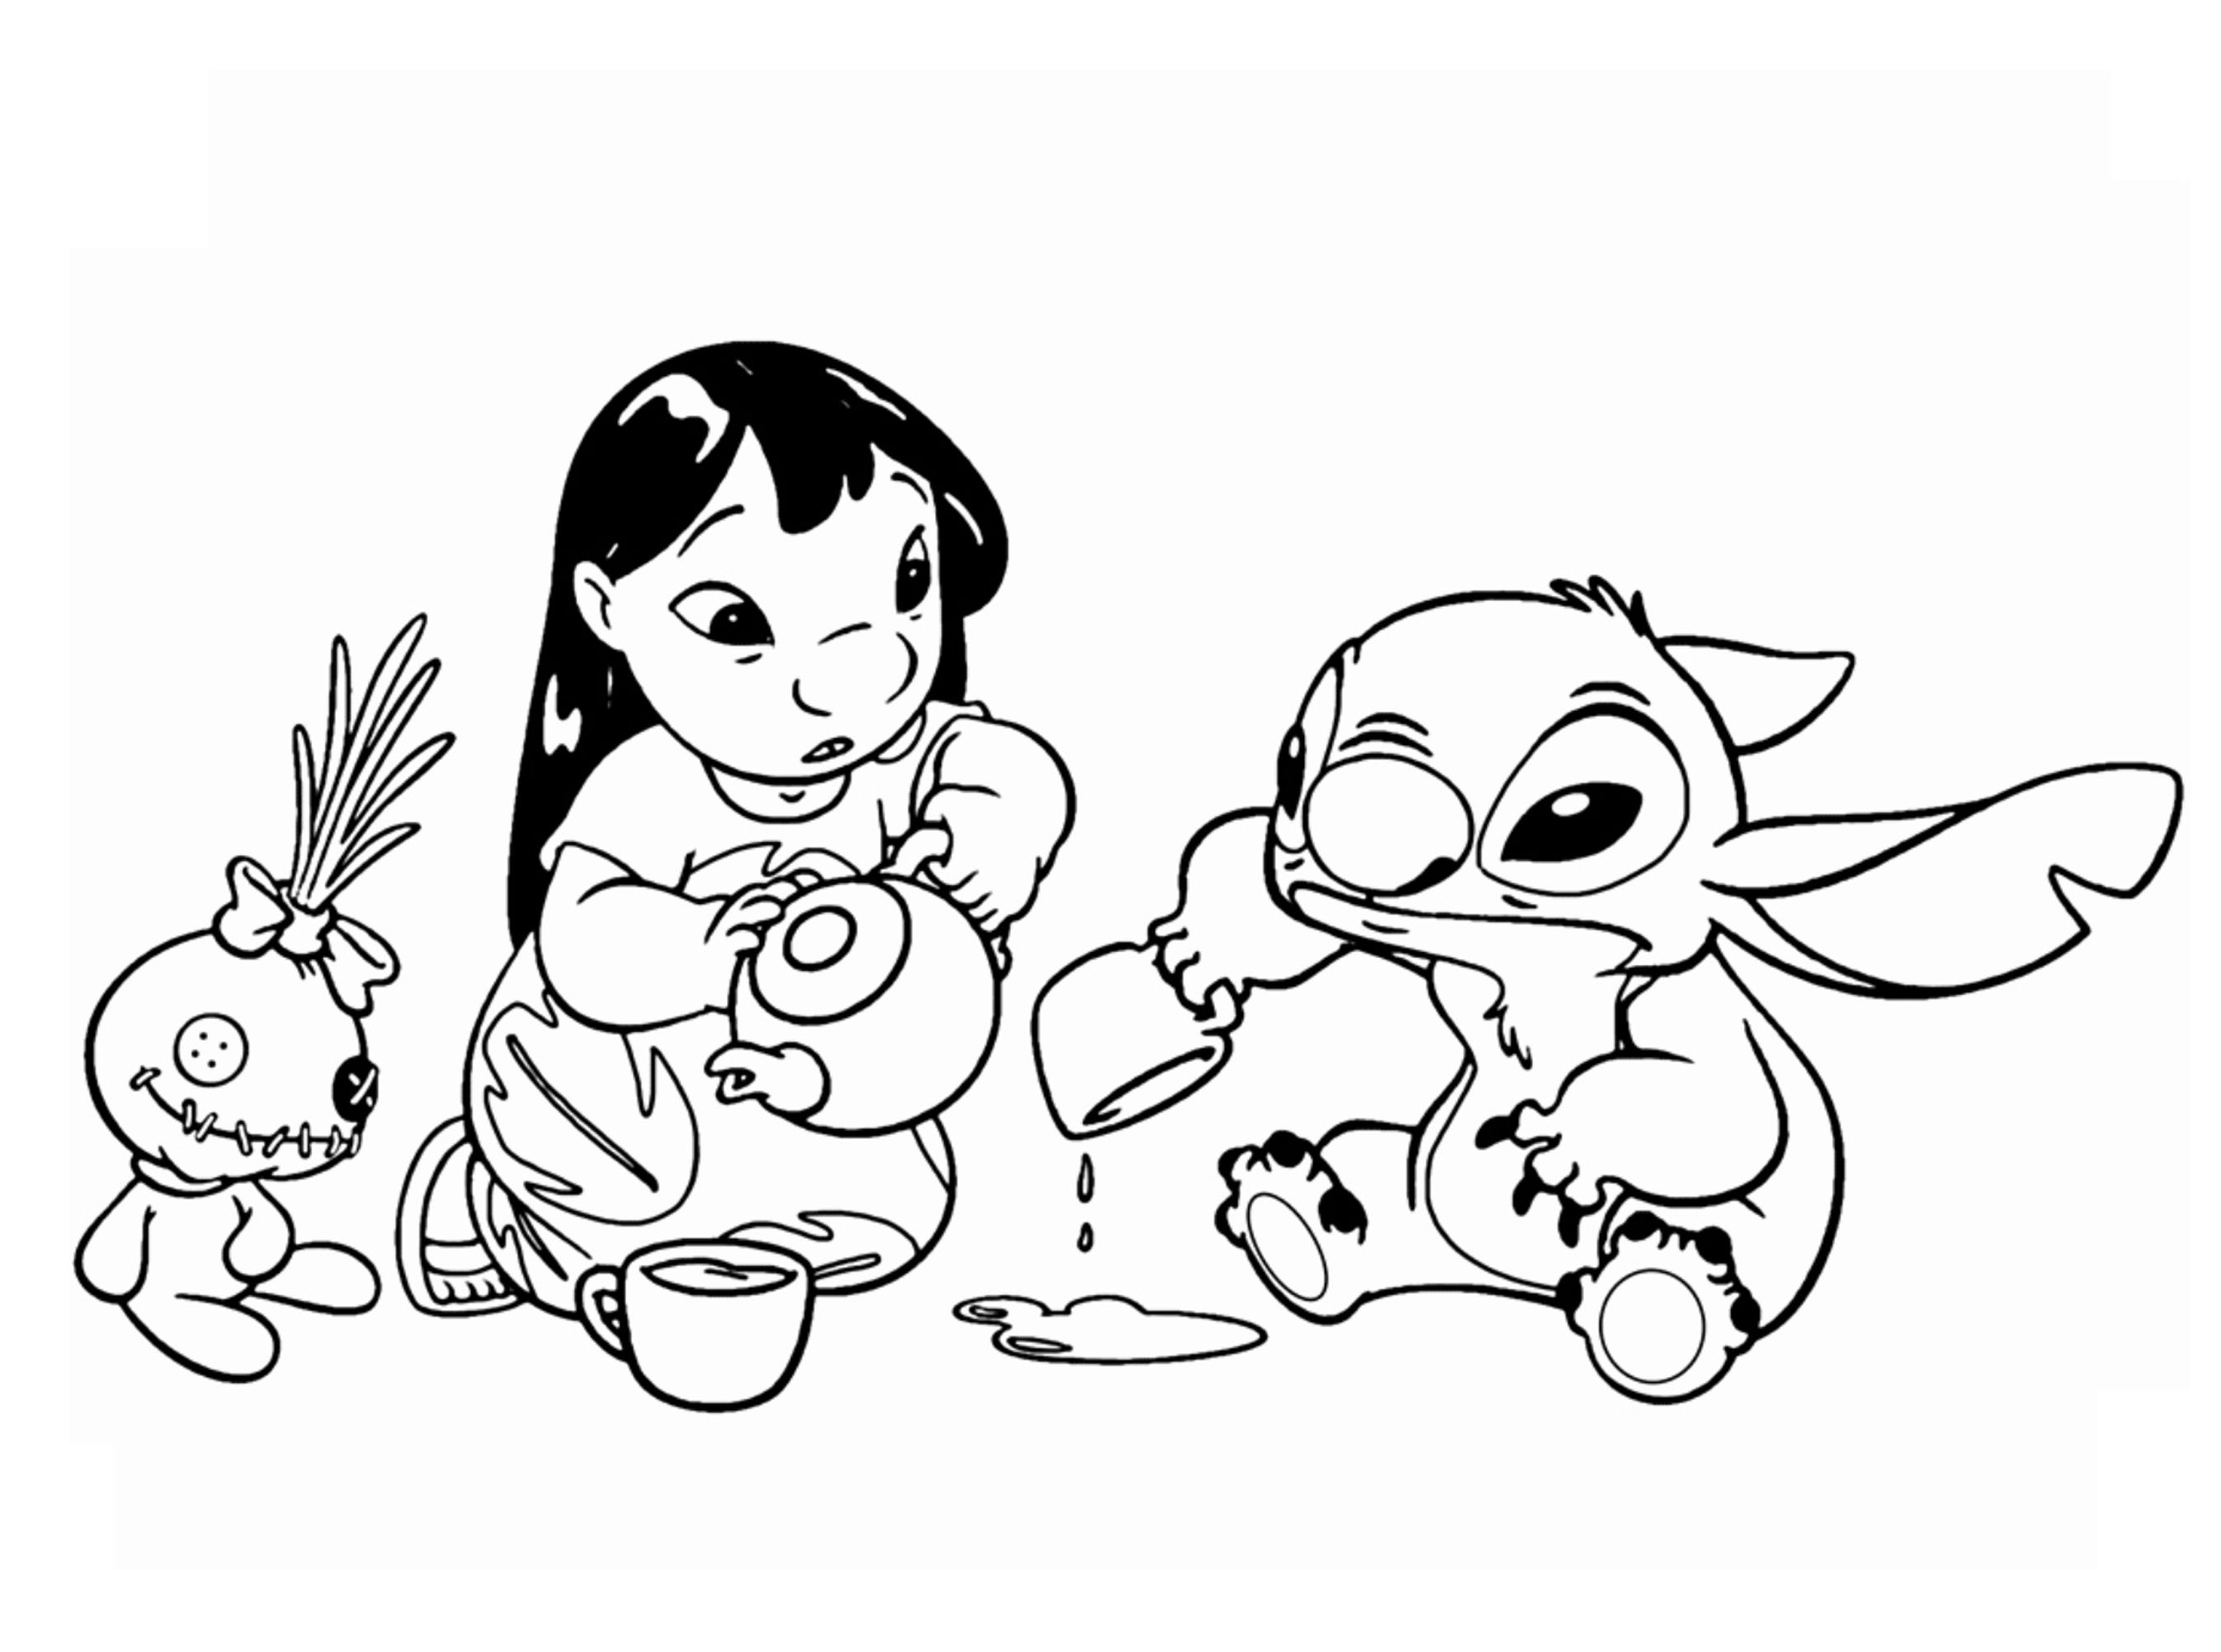 Lilo and Stitch Coloring Pages - ColoringAll